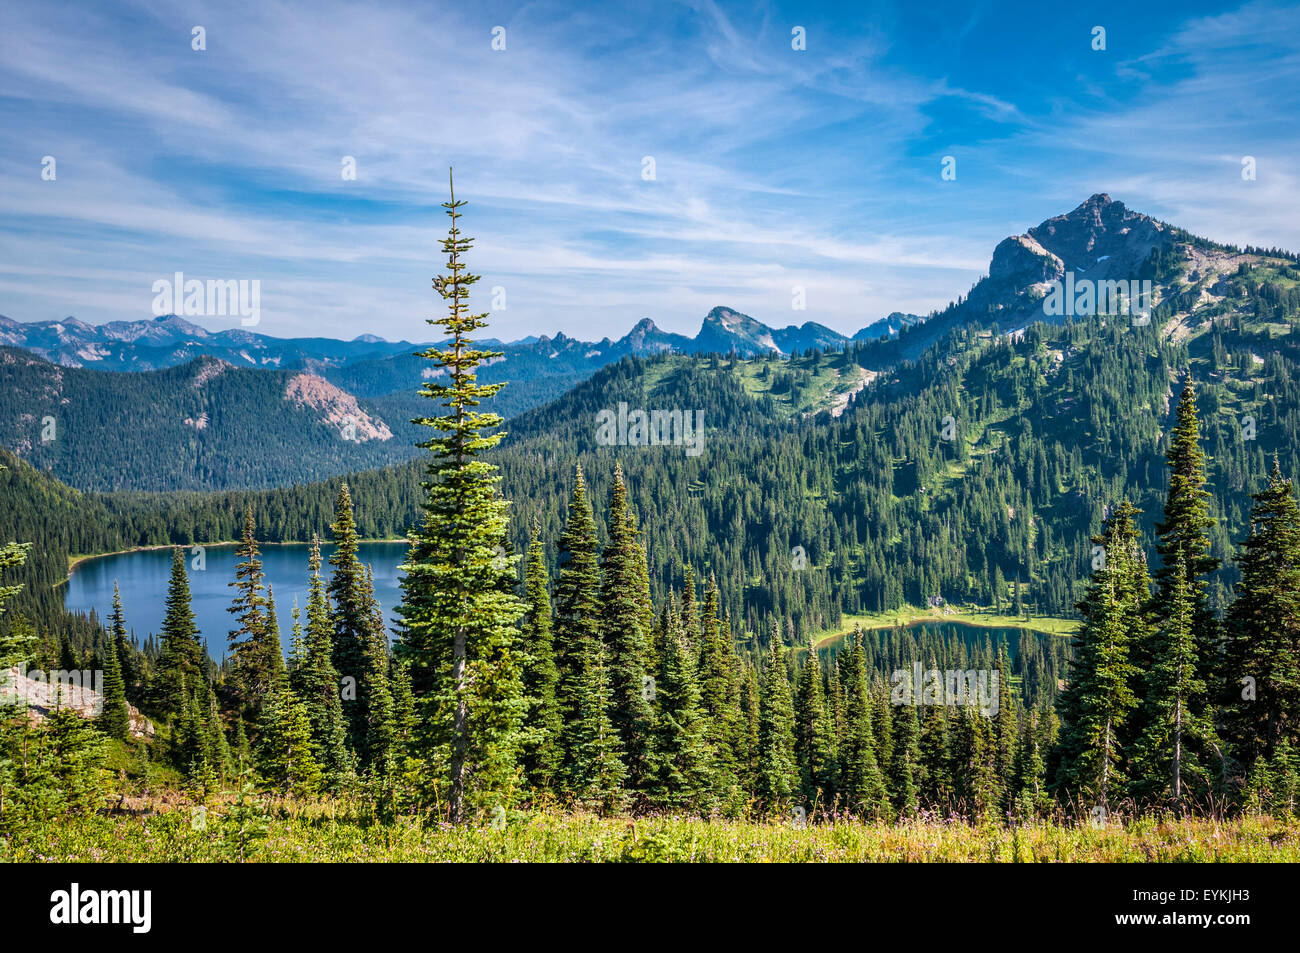 Dewey Lakes in William O. Douglas Wilderness, seen from Naches Loop Trail part of Pacific Crest Trail in Washington. Stock Photo